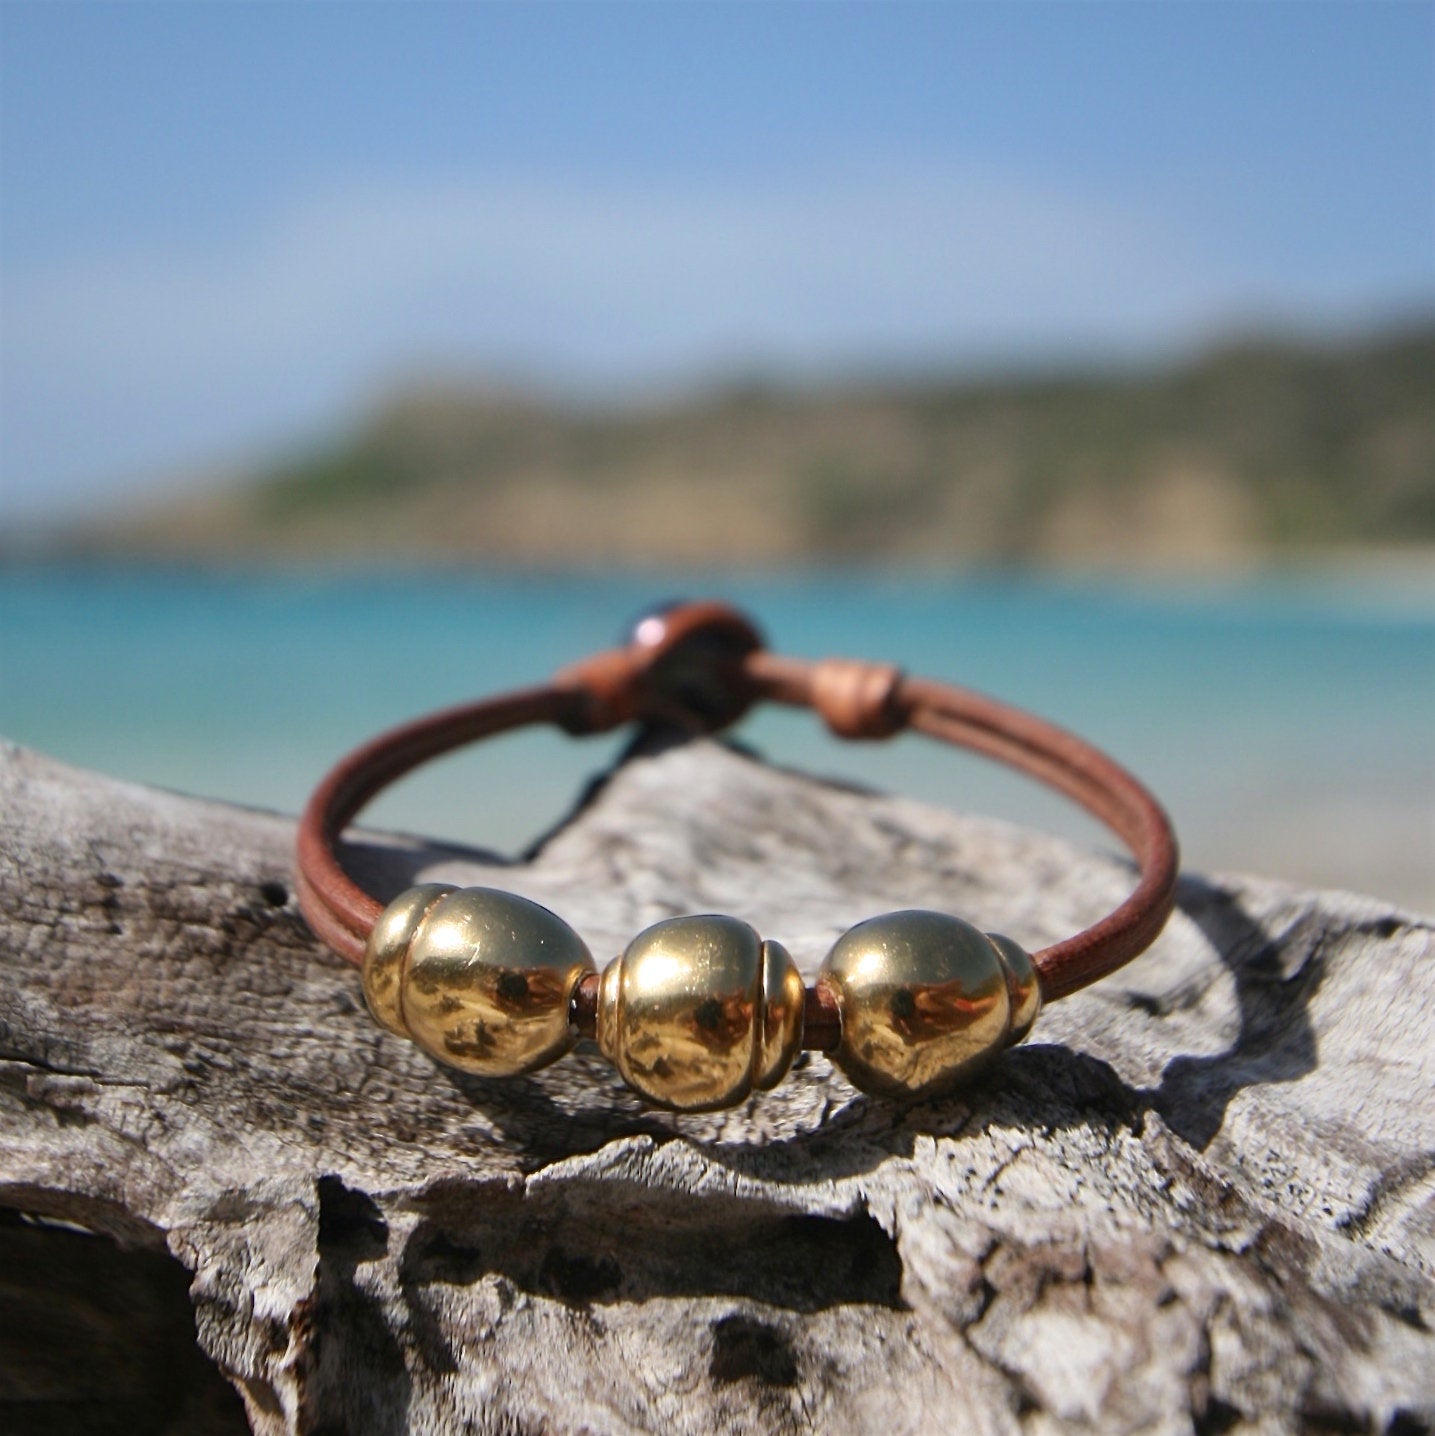 18k solid gold Tahitian pearls replica strung on leather with one Tahitian pearl clasp, Gold and leather, St Barth, beach jewelry, boho chic